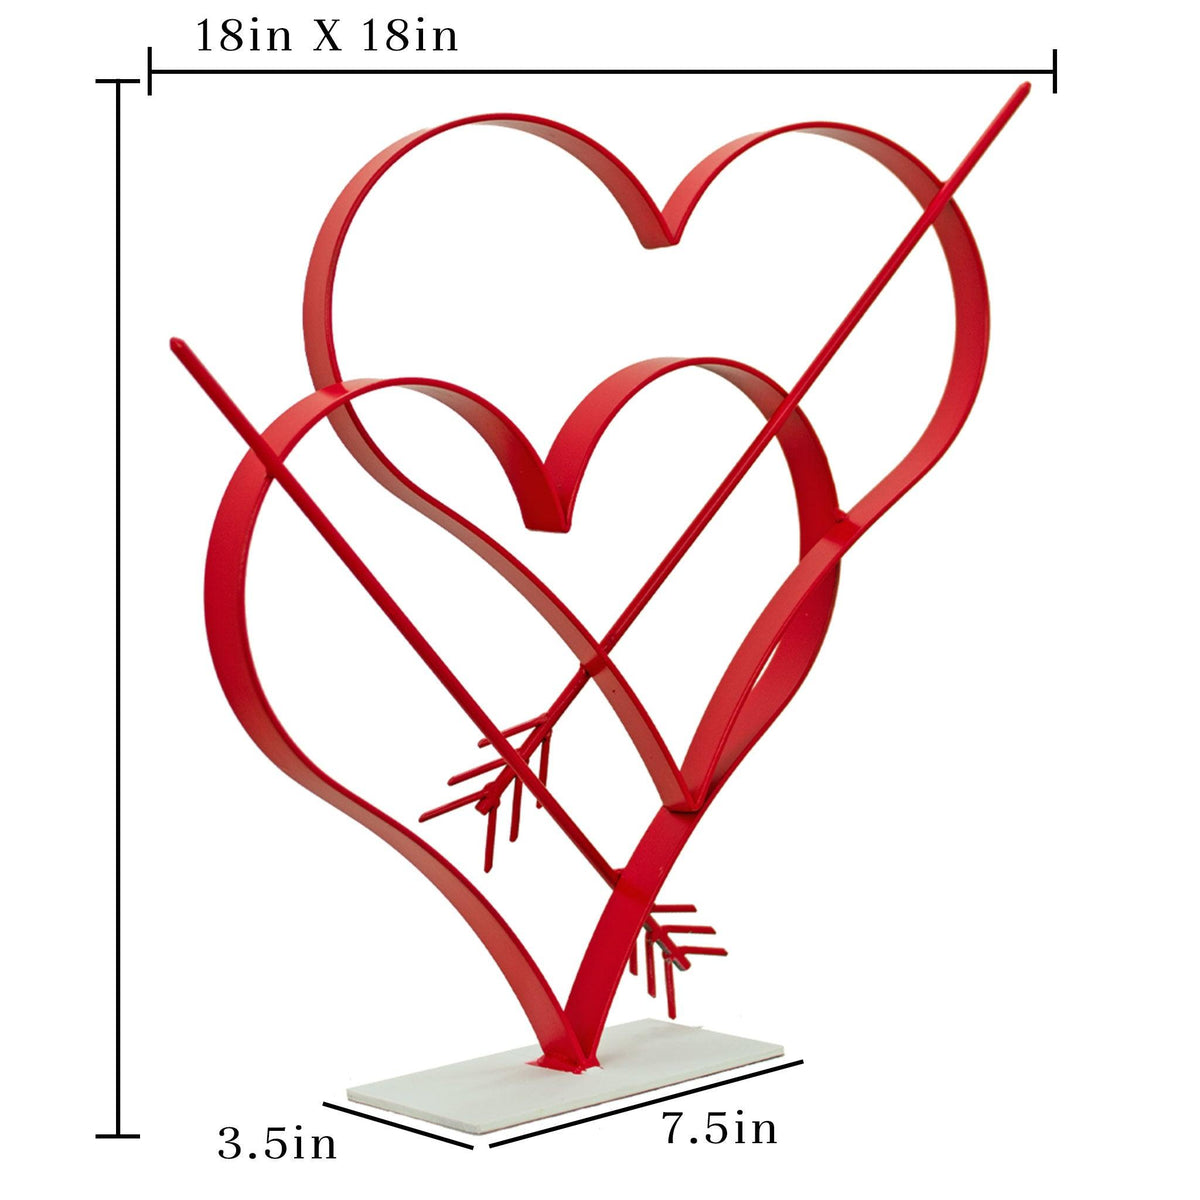 Lee Display's Valentine's Day Double Heart Centerpiece with Cupid's Arrow.  On sale now at leedisplay.com